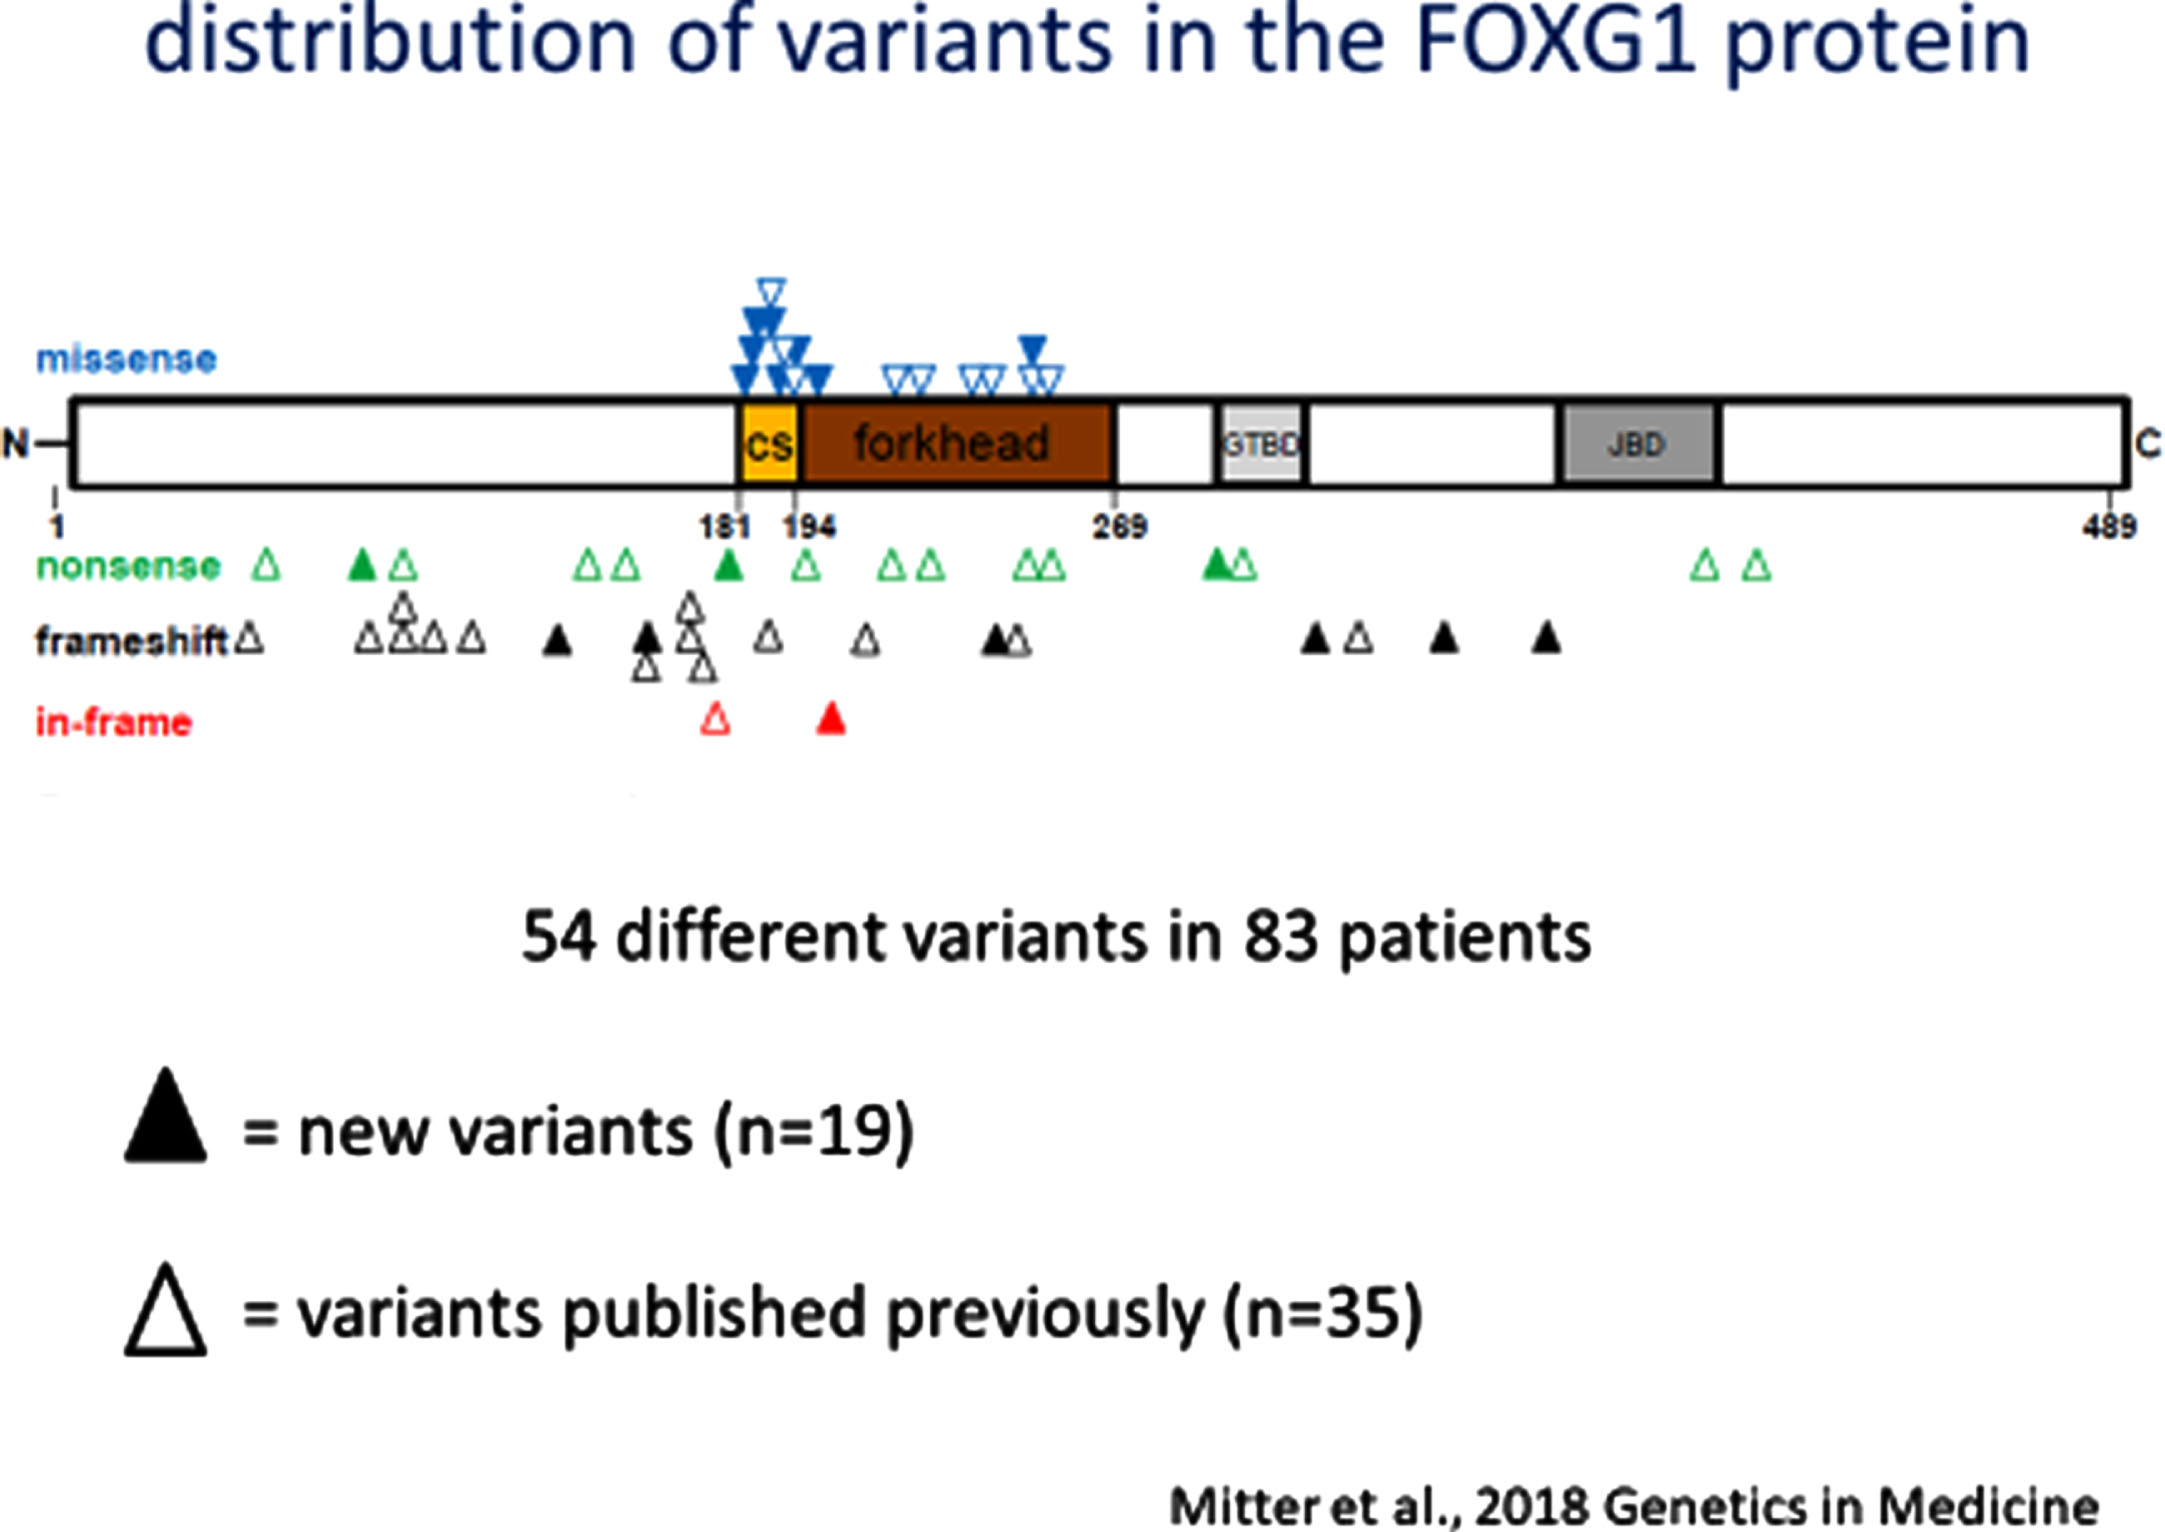 FOXG1 variants across the protein domains.